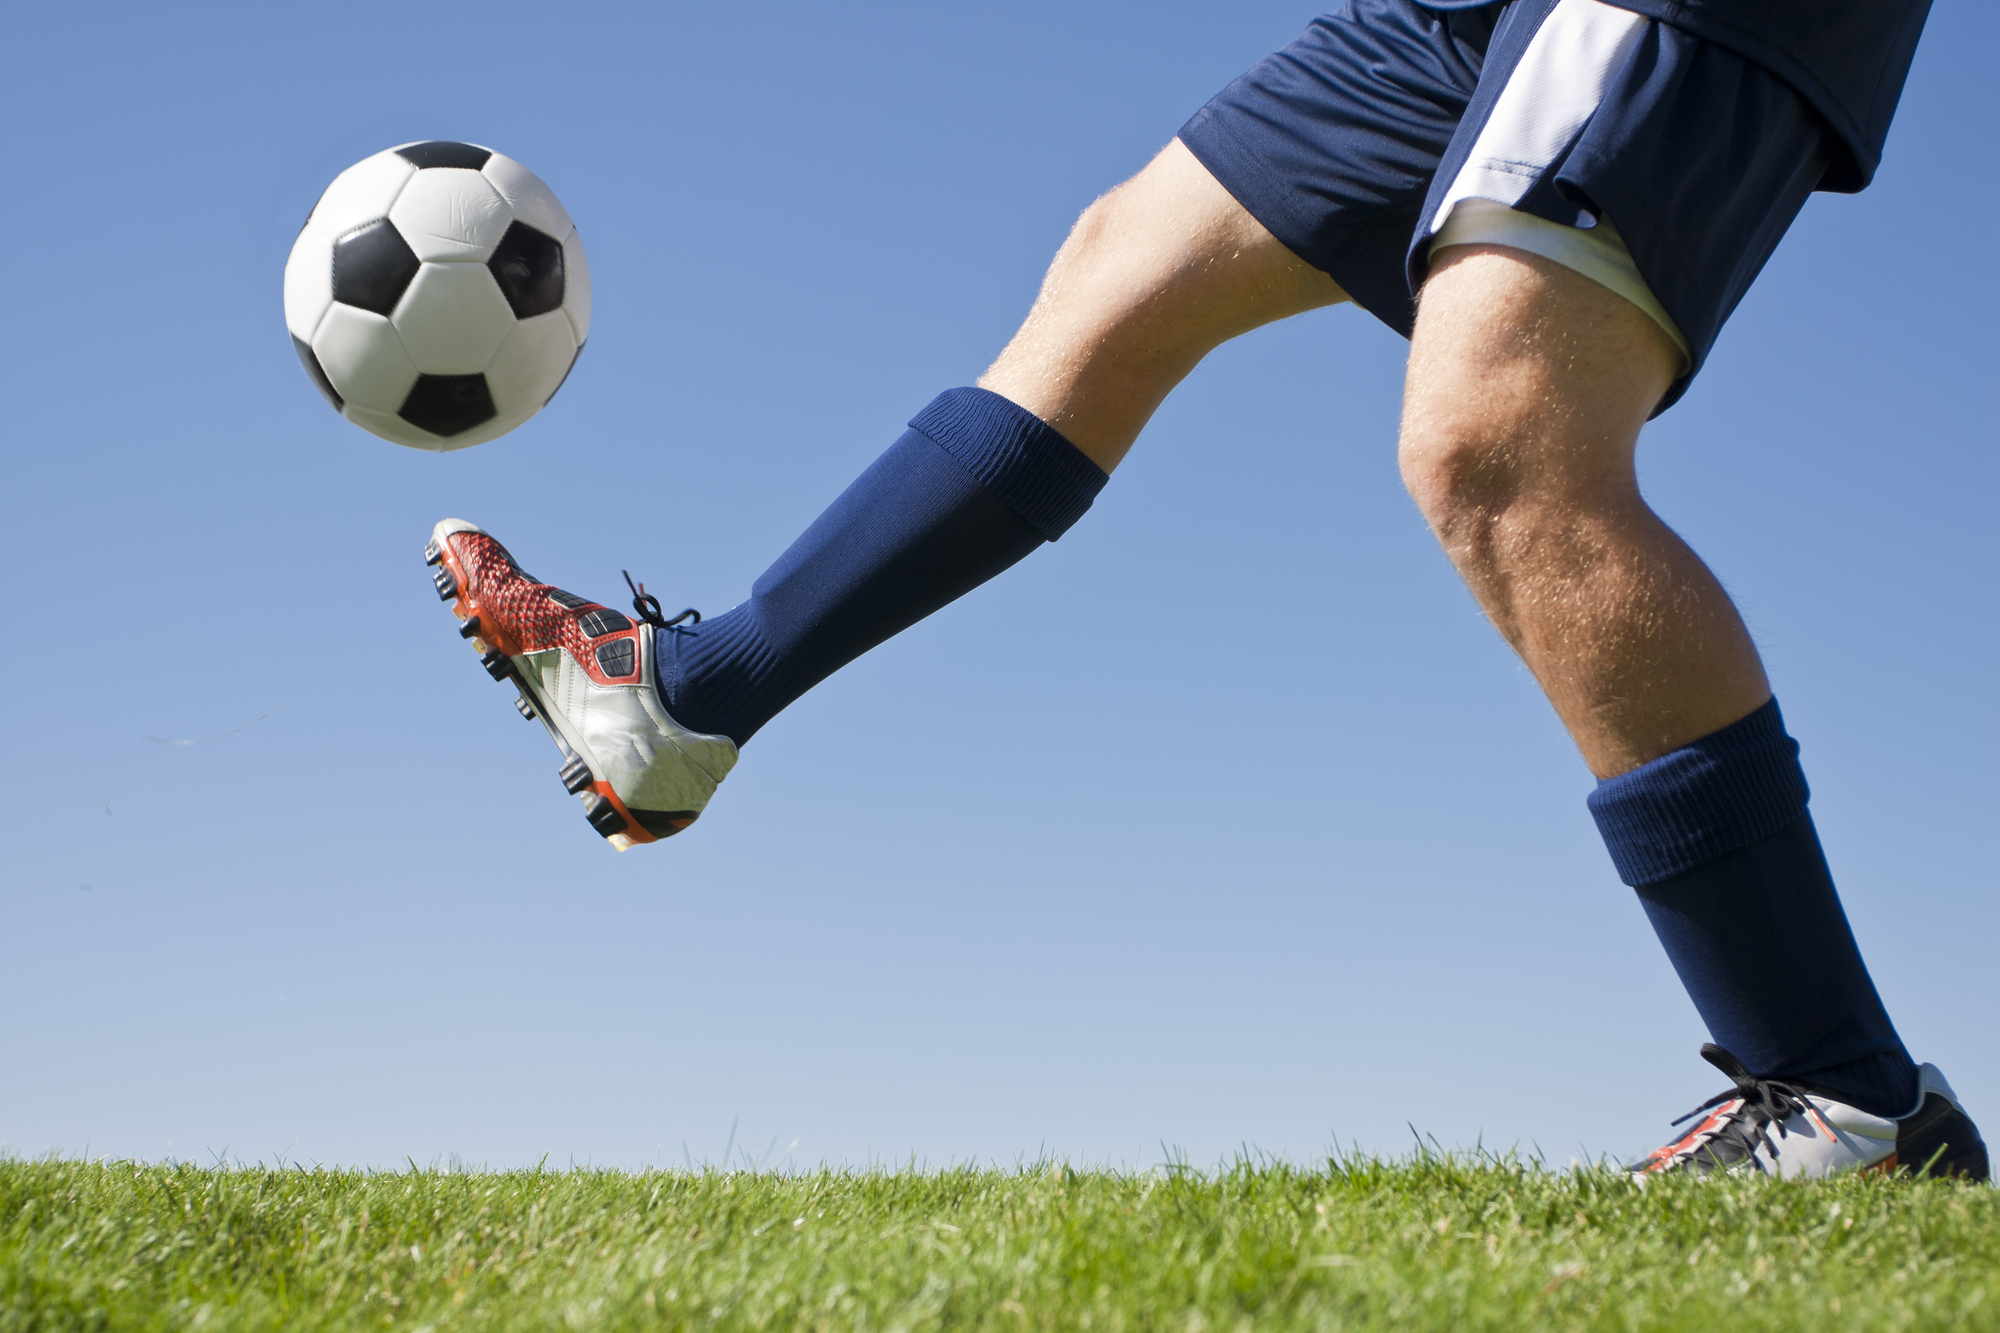 Soccer shin guards: evolution and improvements to date